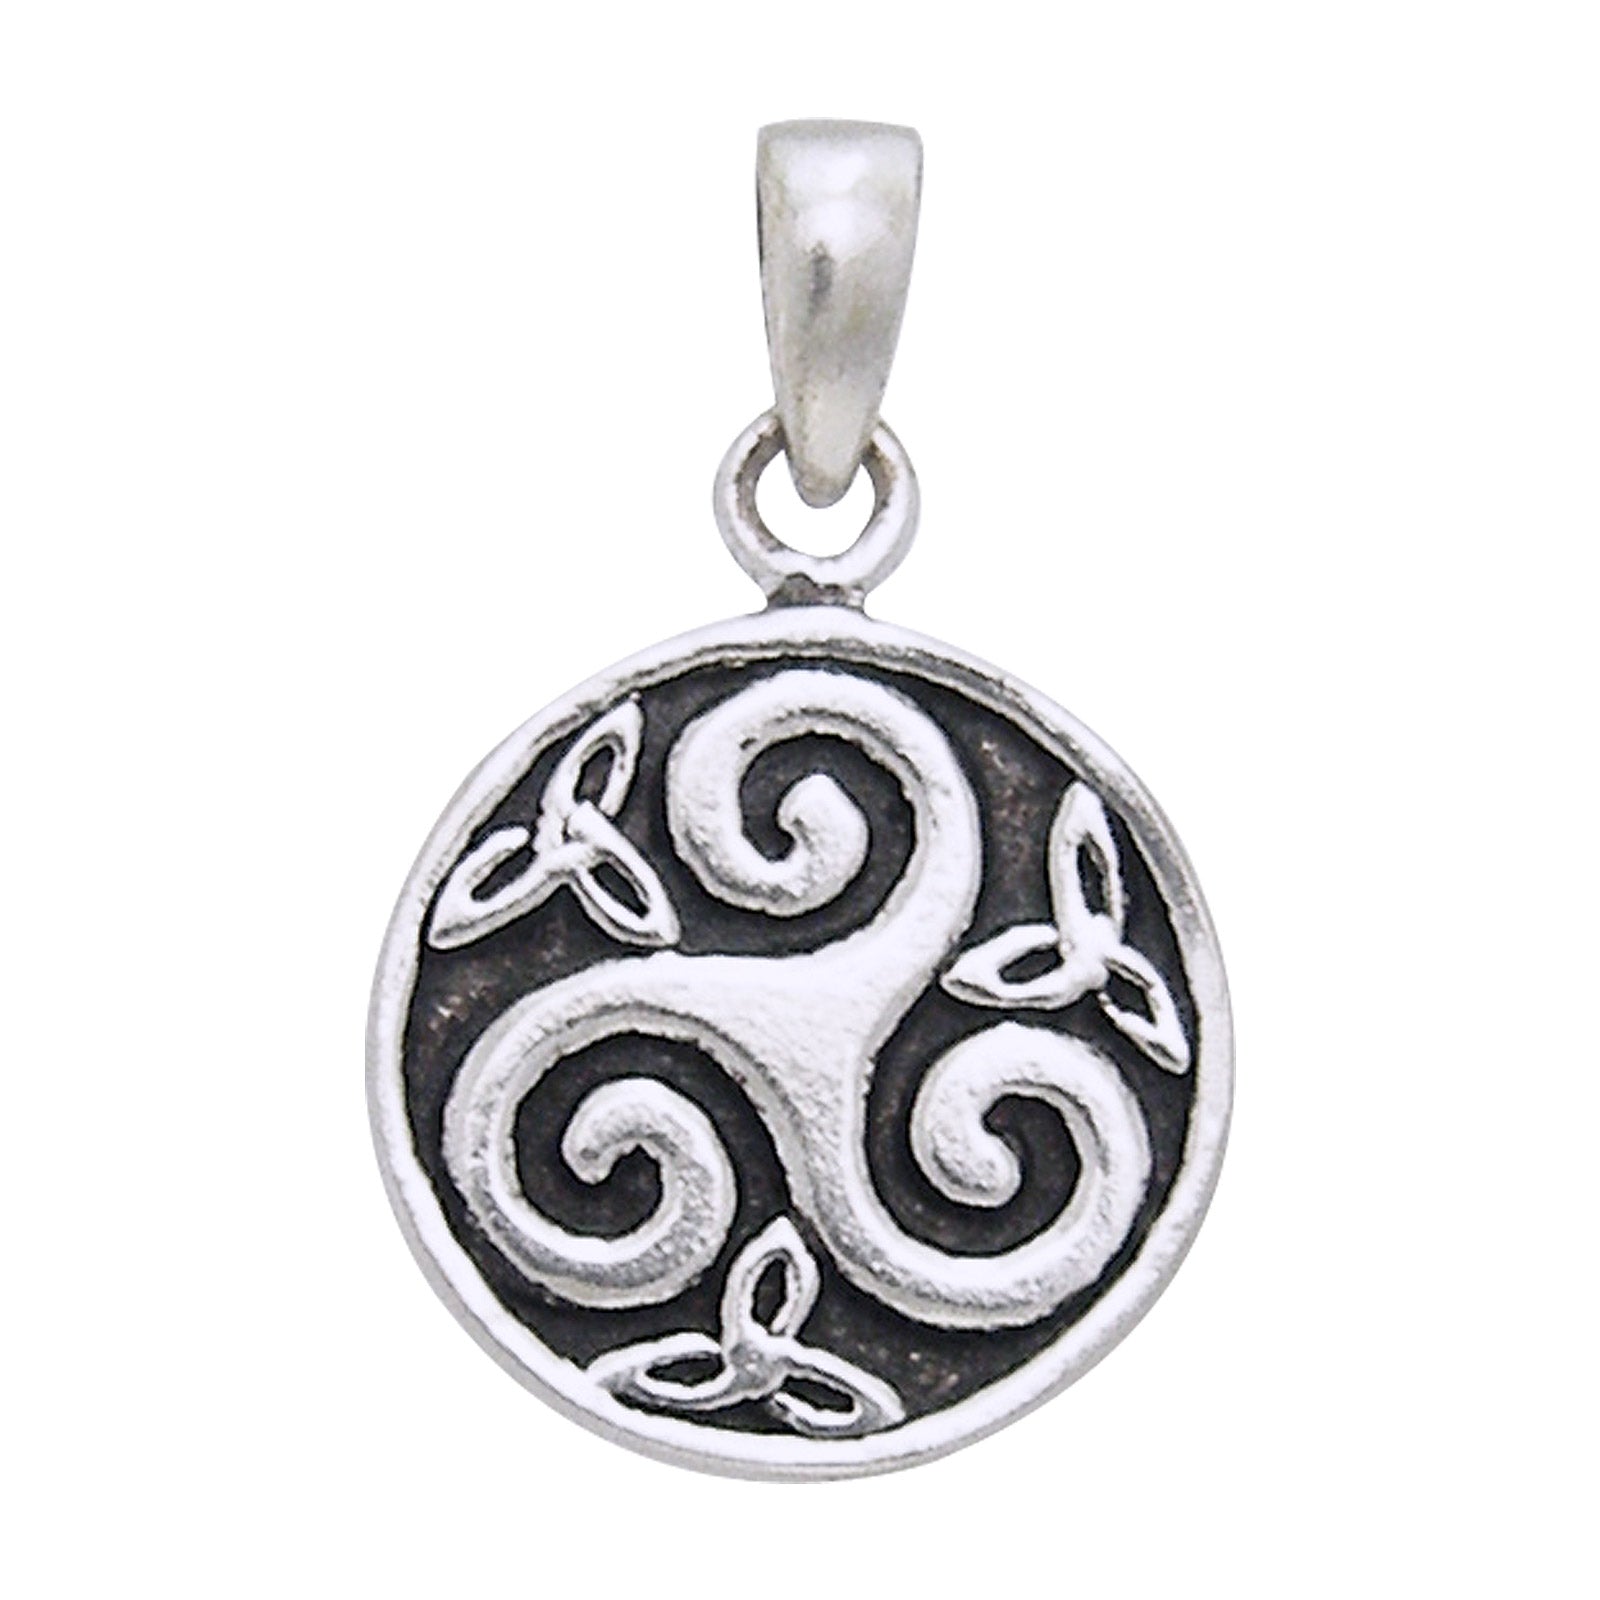 Triskelion Small Round Celtic Knot Triskele Swirl Sterling Silver Pendant - Silver Insanity